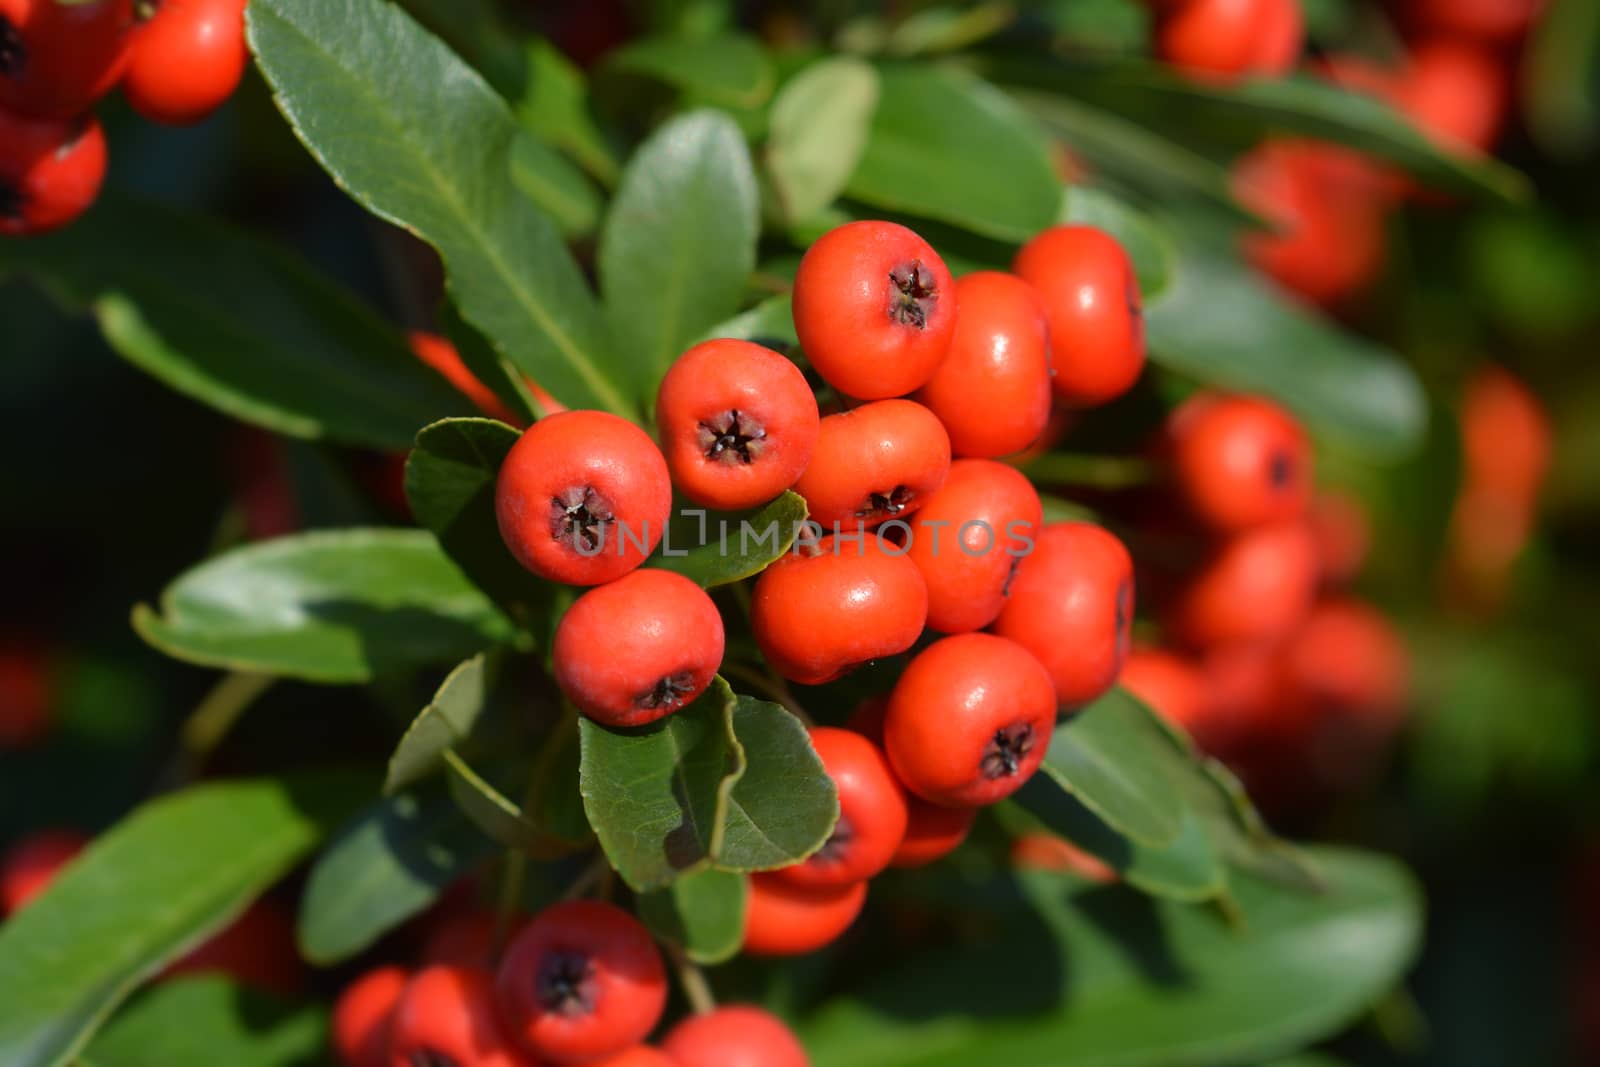 Firethorn Red Star - Latin name - Pyracantha Red Star